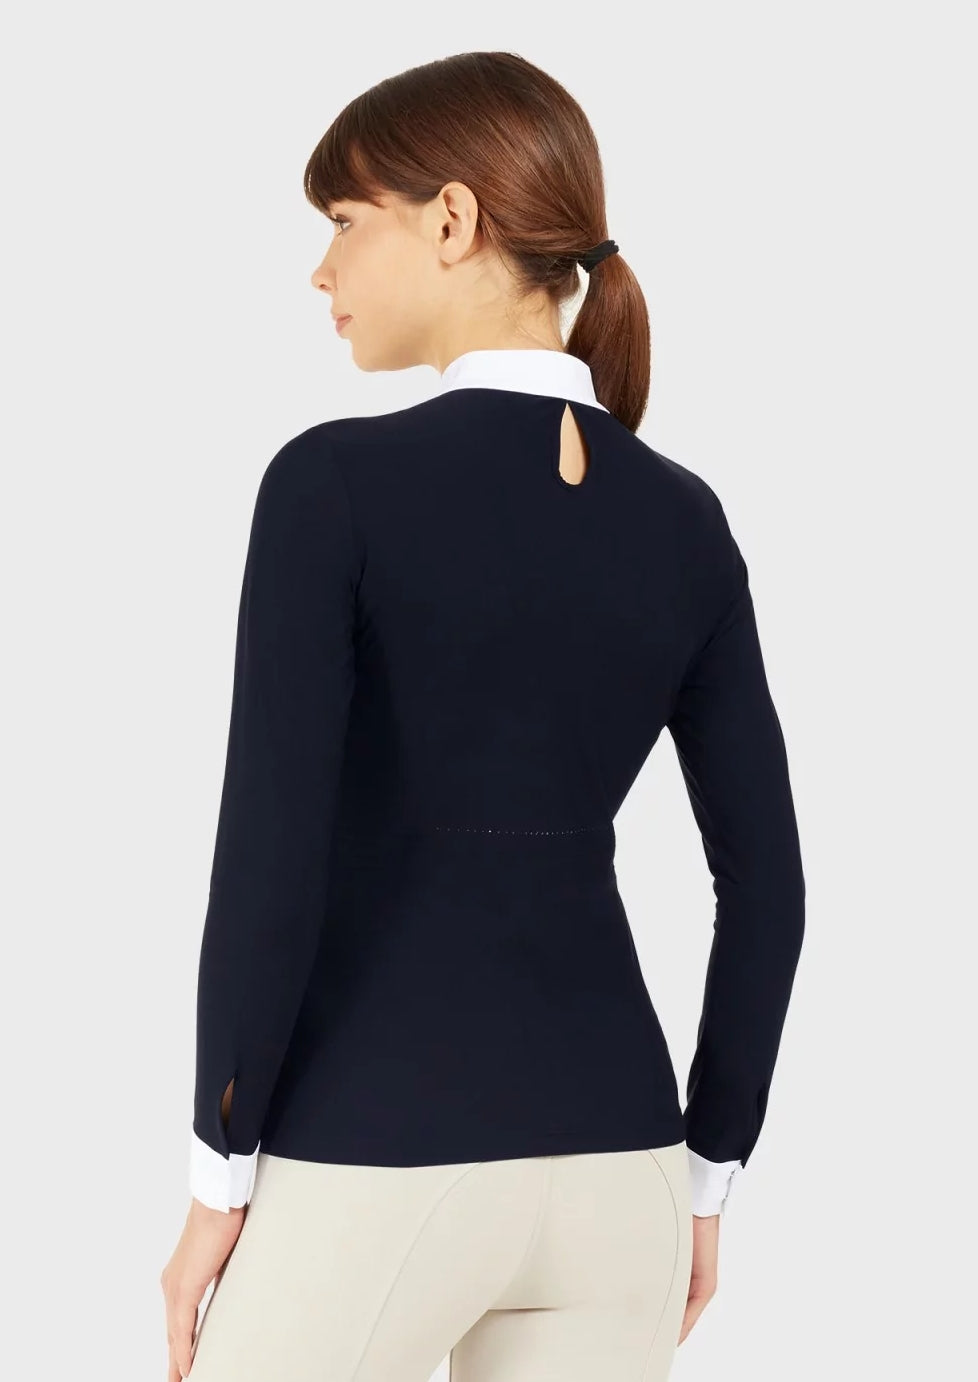 Samshield Competition Shirt Long Sleeves Ladies Aloise Navy